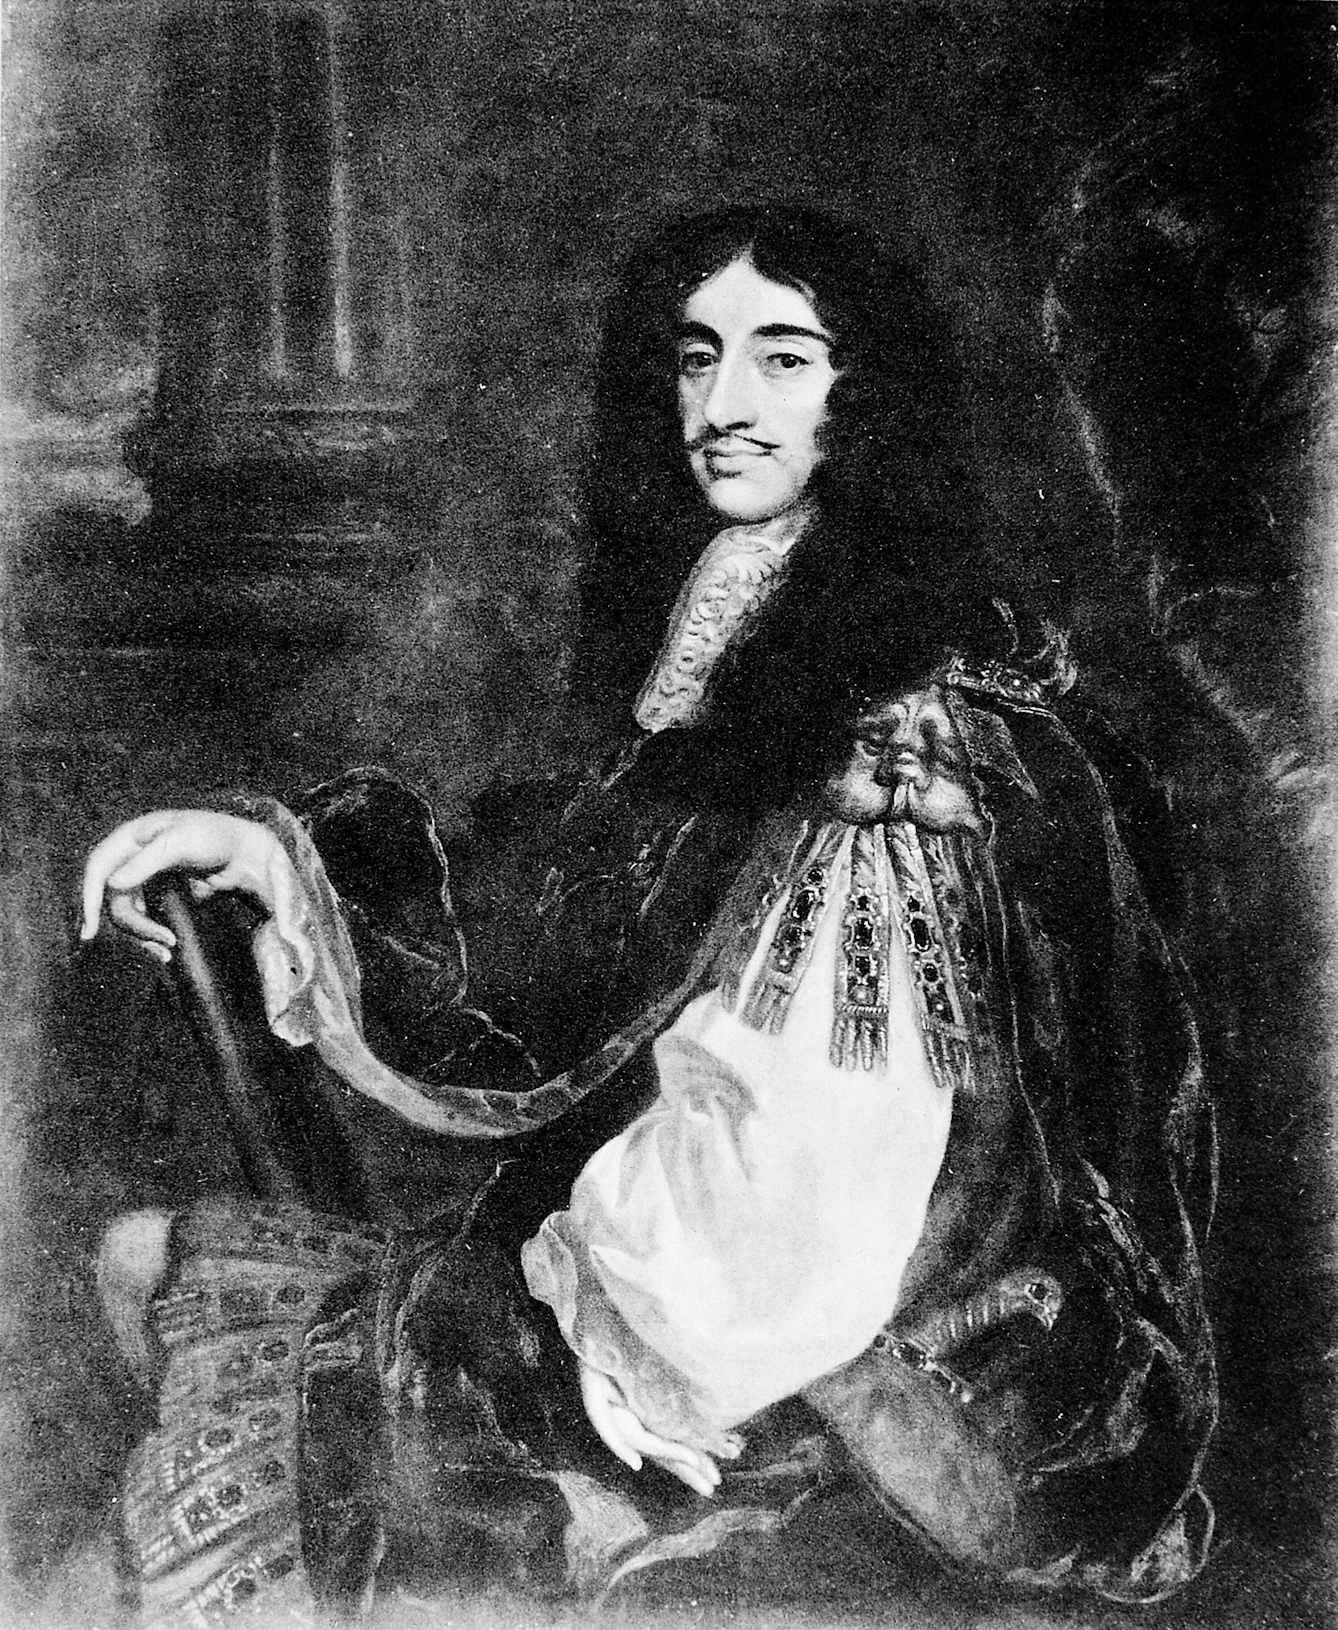 Black and white painting of King Charles II. He wears embellished robes and his right hand is poised on a wooden object. 